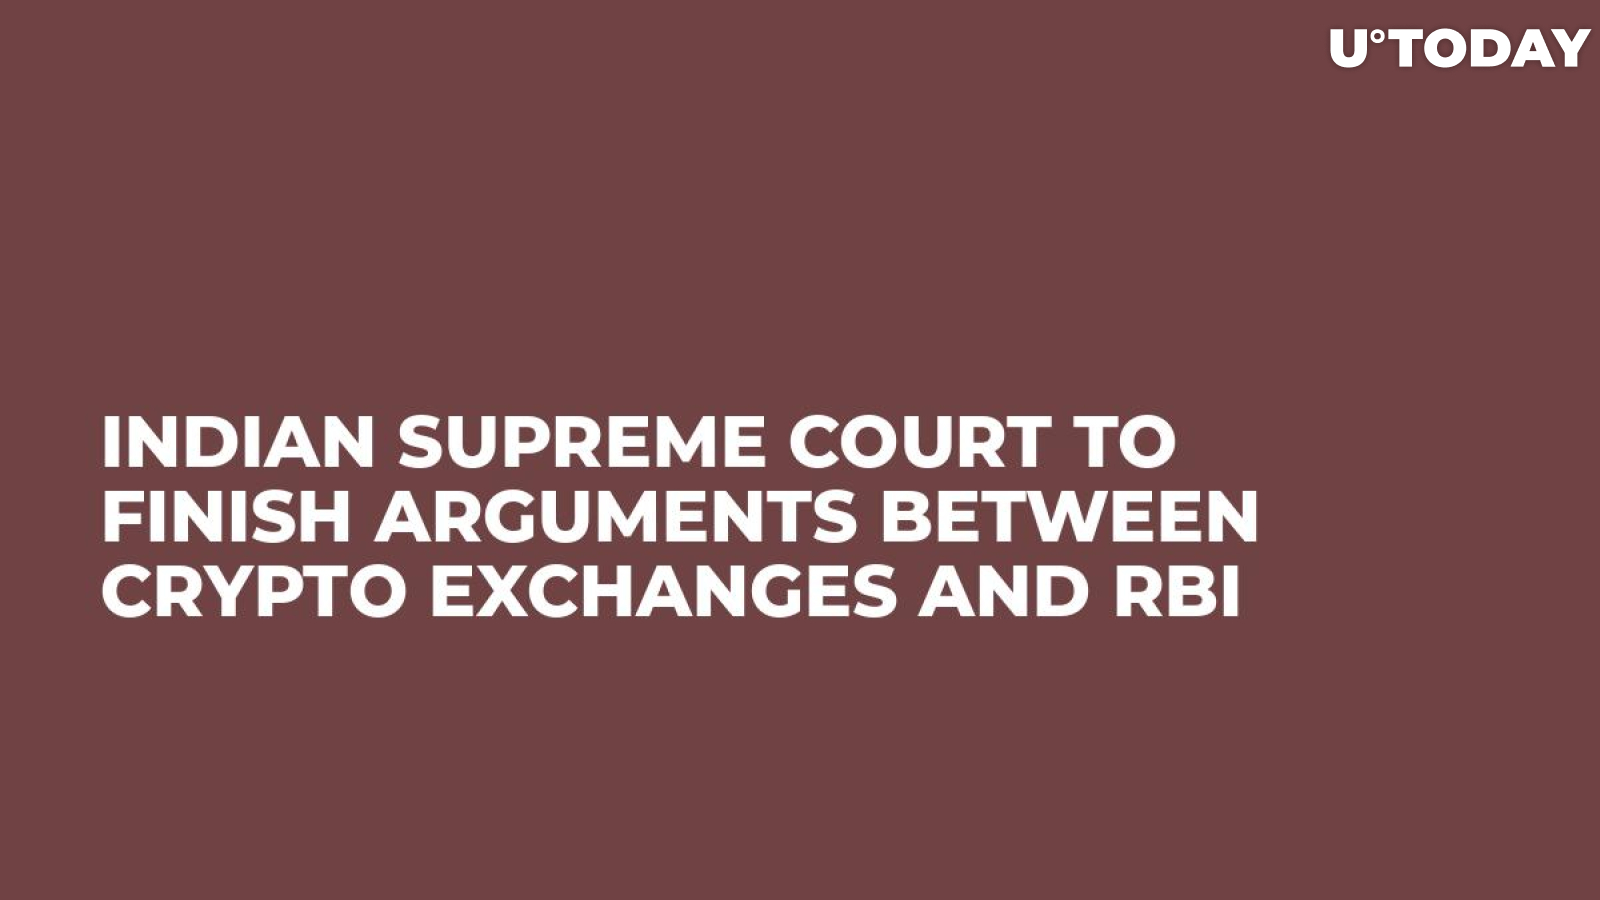 Indian Supreme Court to Finish Arguments Between Crypto Exchanges and RBI